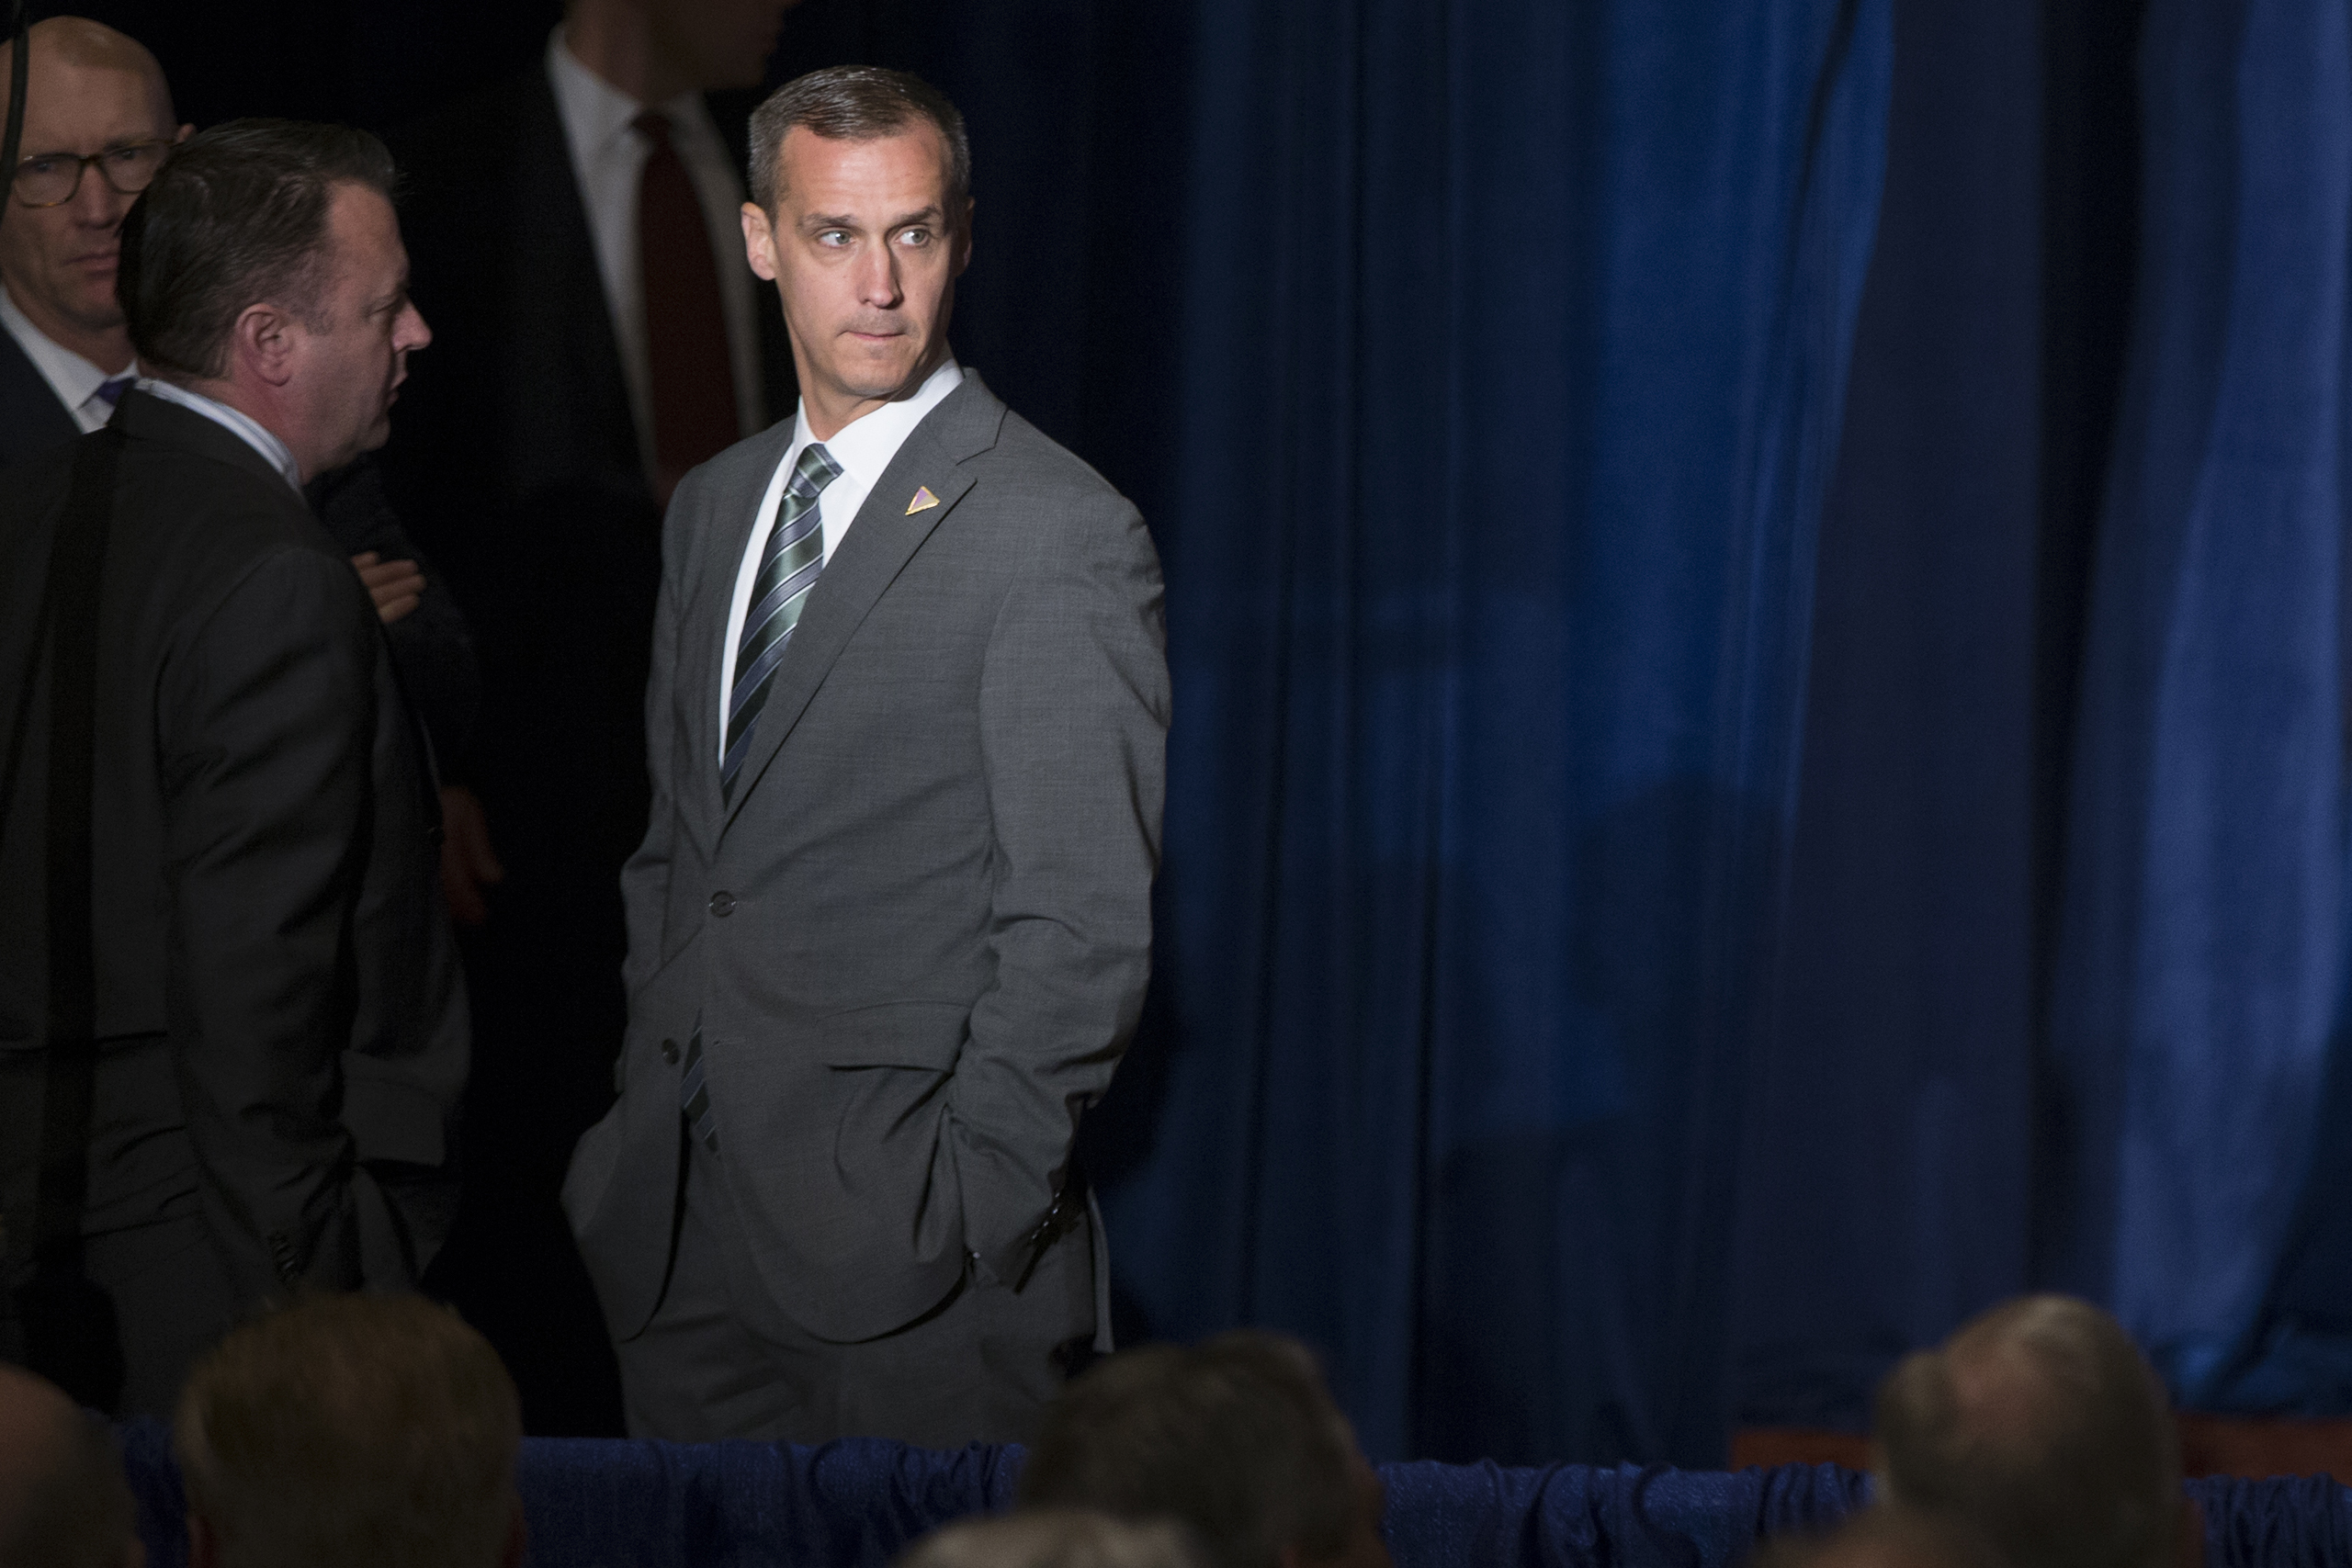 Corey Lewandowski, campaign manager for Republican presidential candidate Donald Trump, waits before the start of a foreign policy speech at the Mayflower Hotel in Washington D.C. on April 27, 2016. (Evan Vucci—AP)